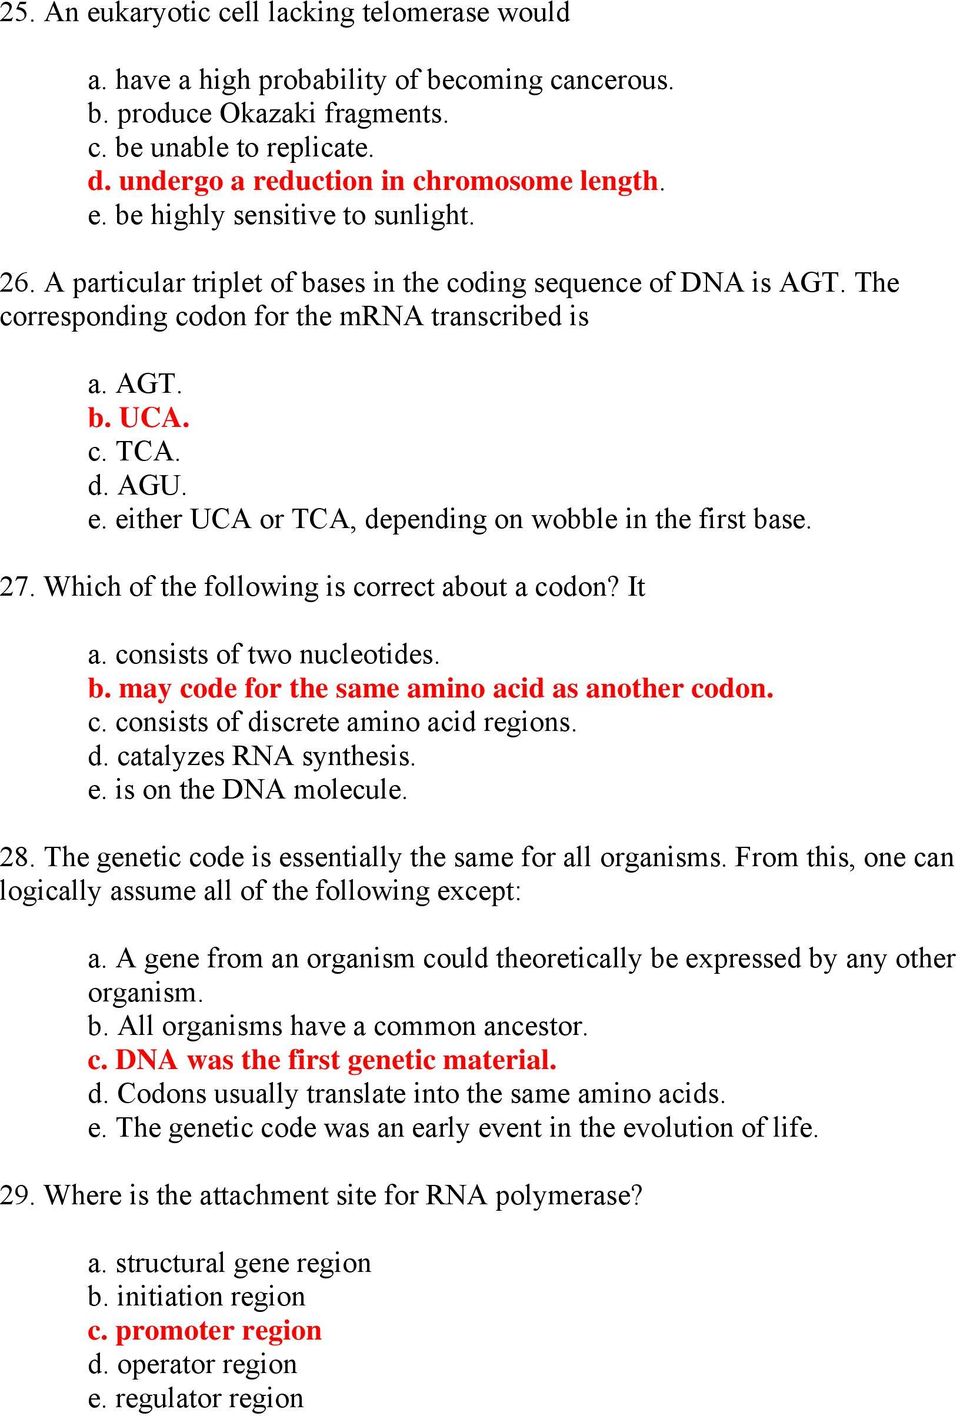 either UCA or TCA, depending on wobble in the first base. 27. Which of the following is correct about a codon? It a. consists of two nucleotides. b. may code for the same amino acid as another codon.